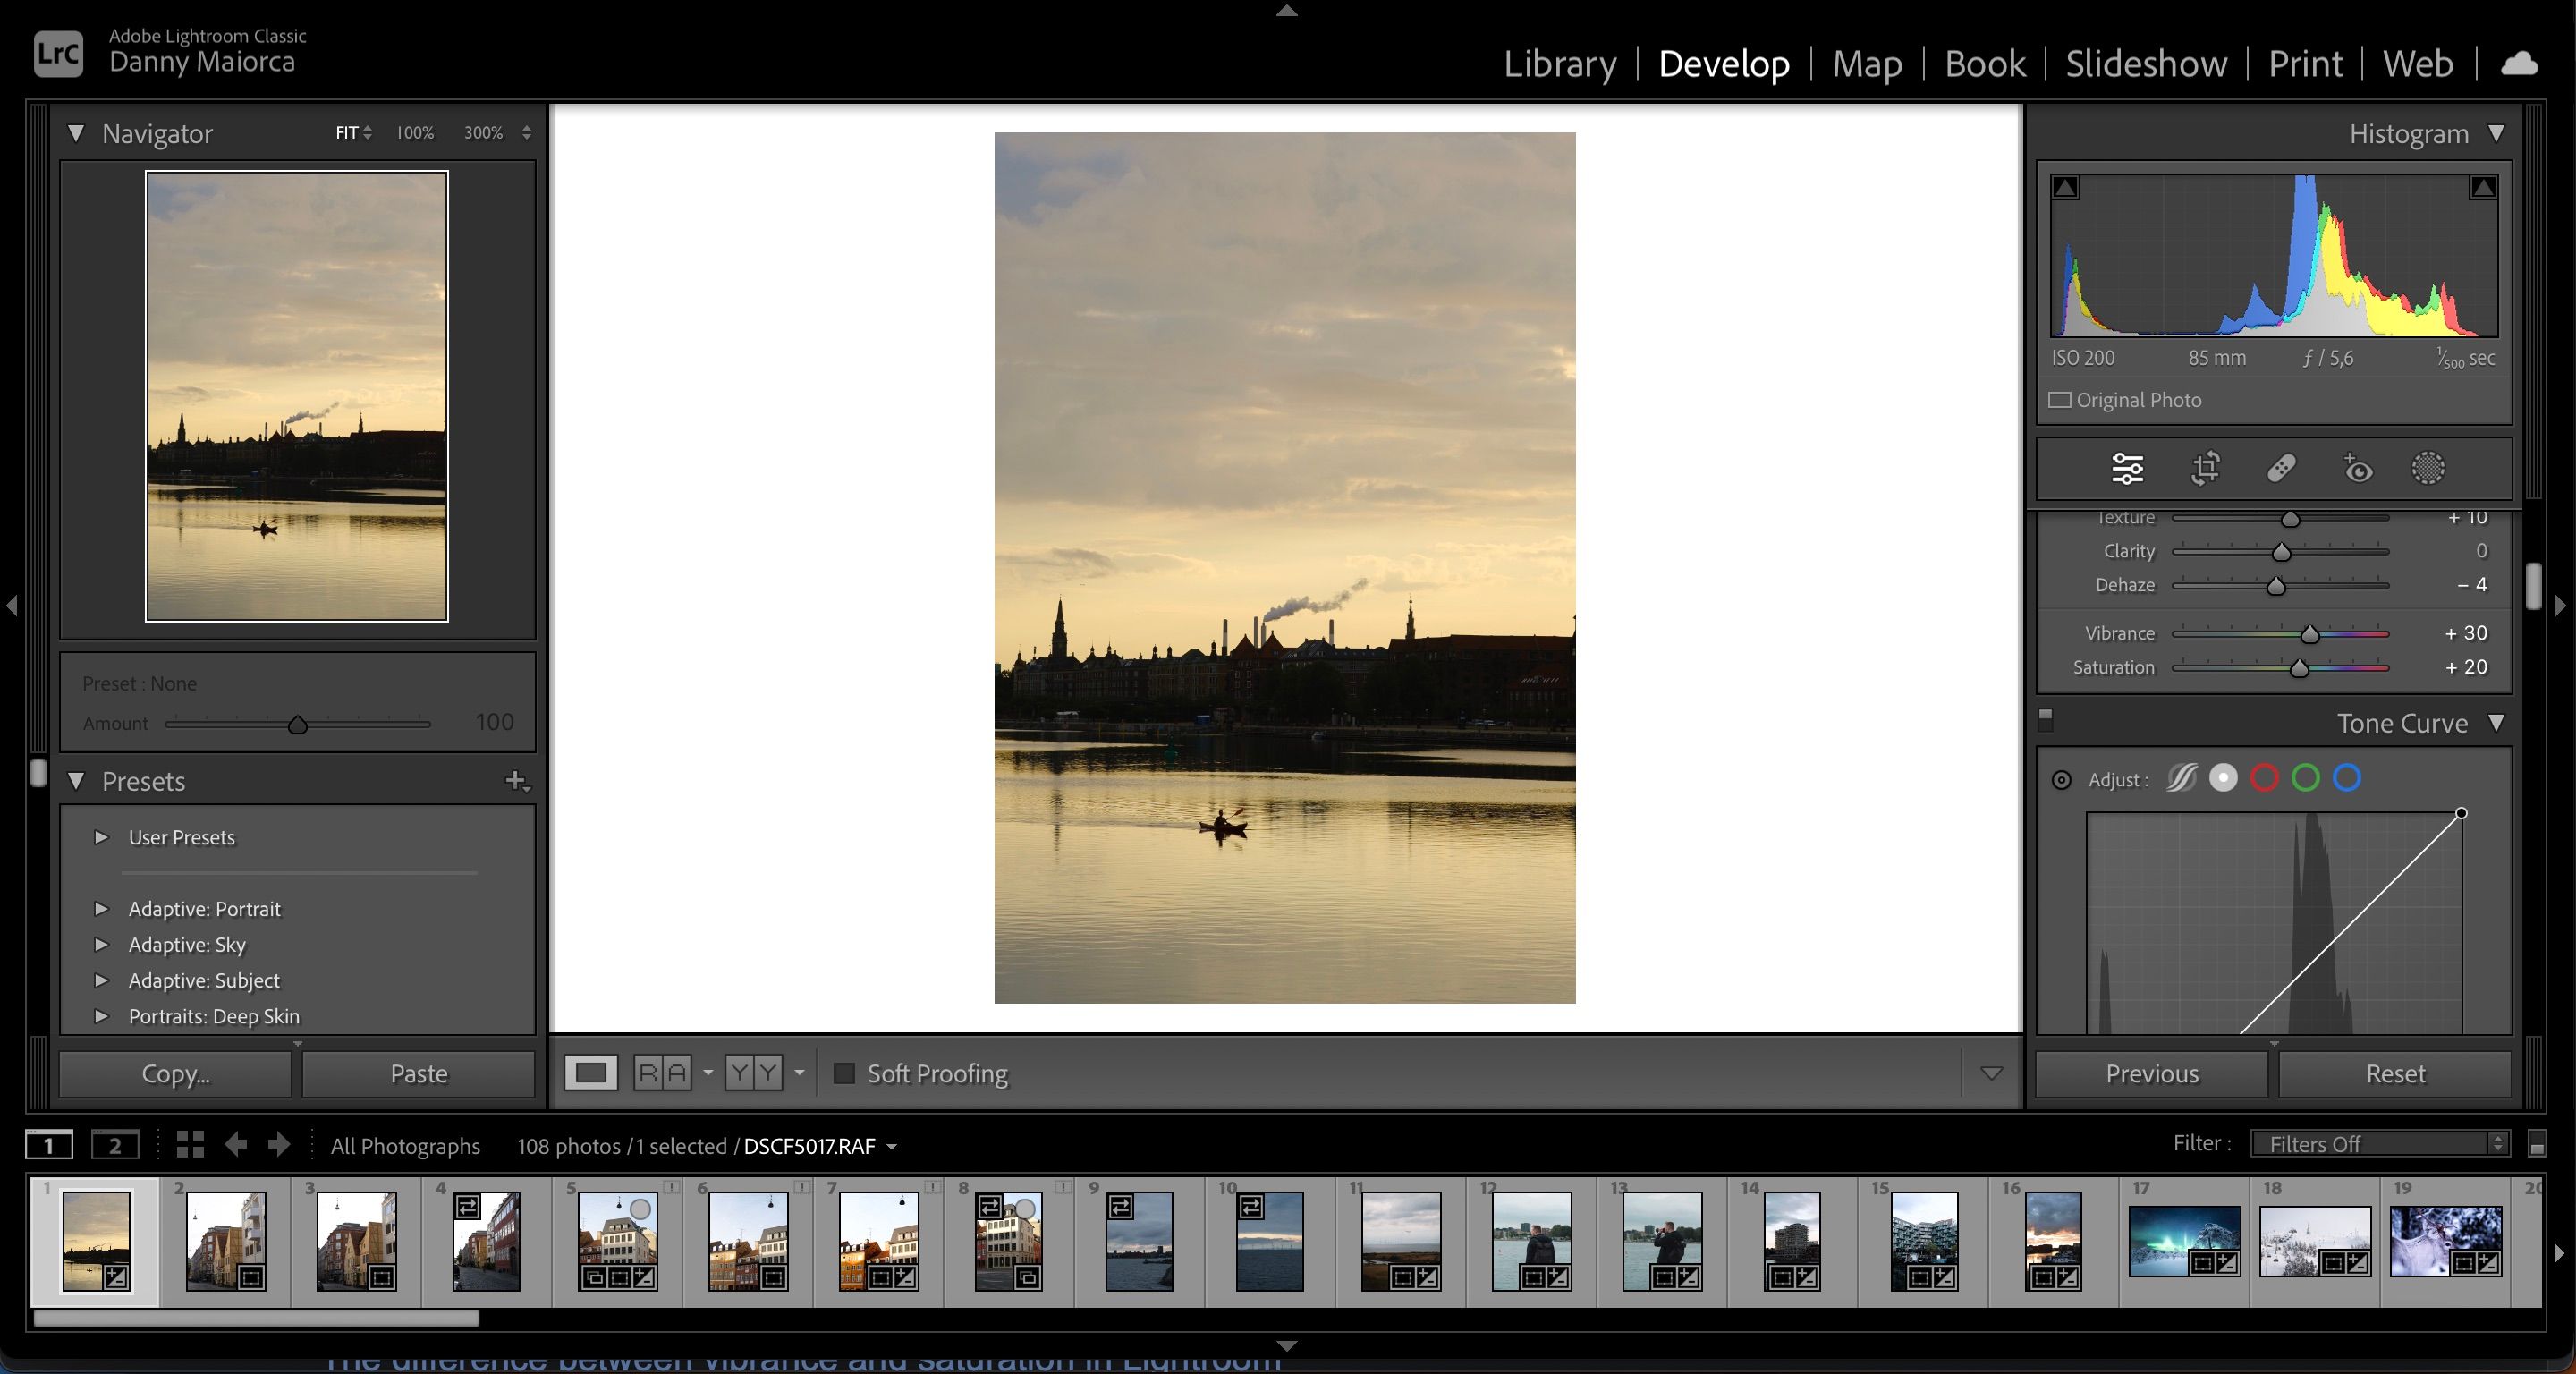 Screenshot showing vibrance and saturation sliders in Adobe Lightroom